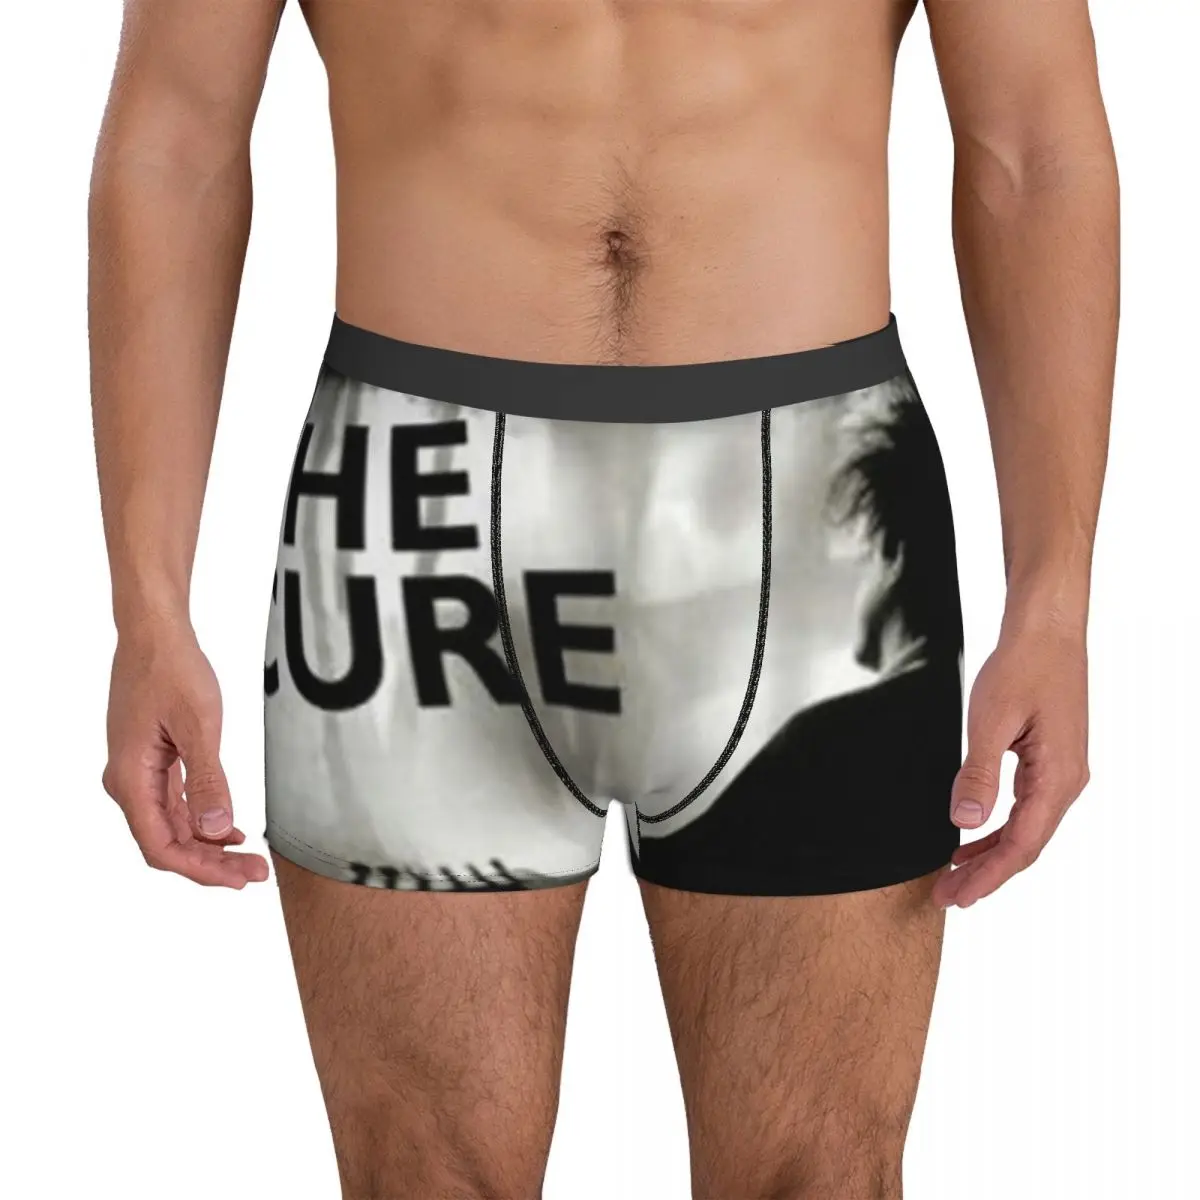 The Cure Band Galaxy Boys Underwear music album black man cool Comfortable Panties Custom Boxer Brief Pouch Male Boxershorts